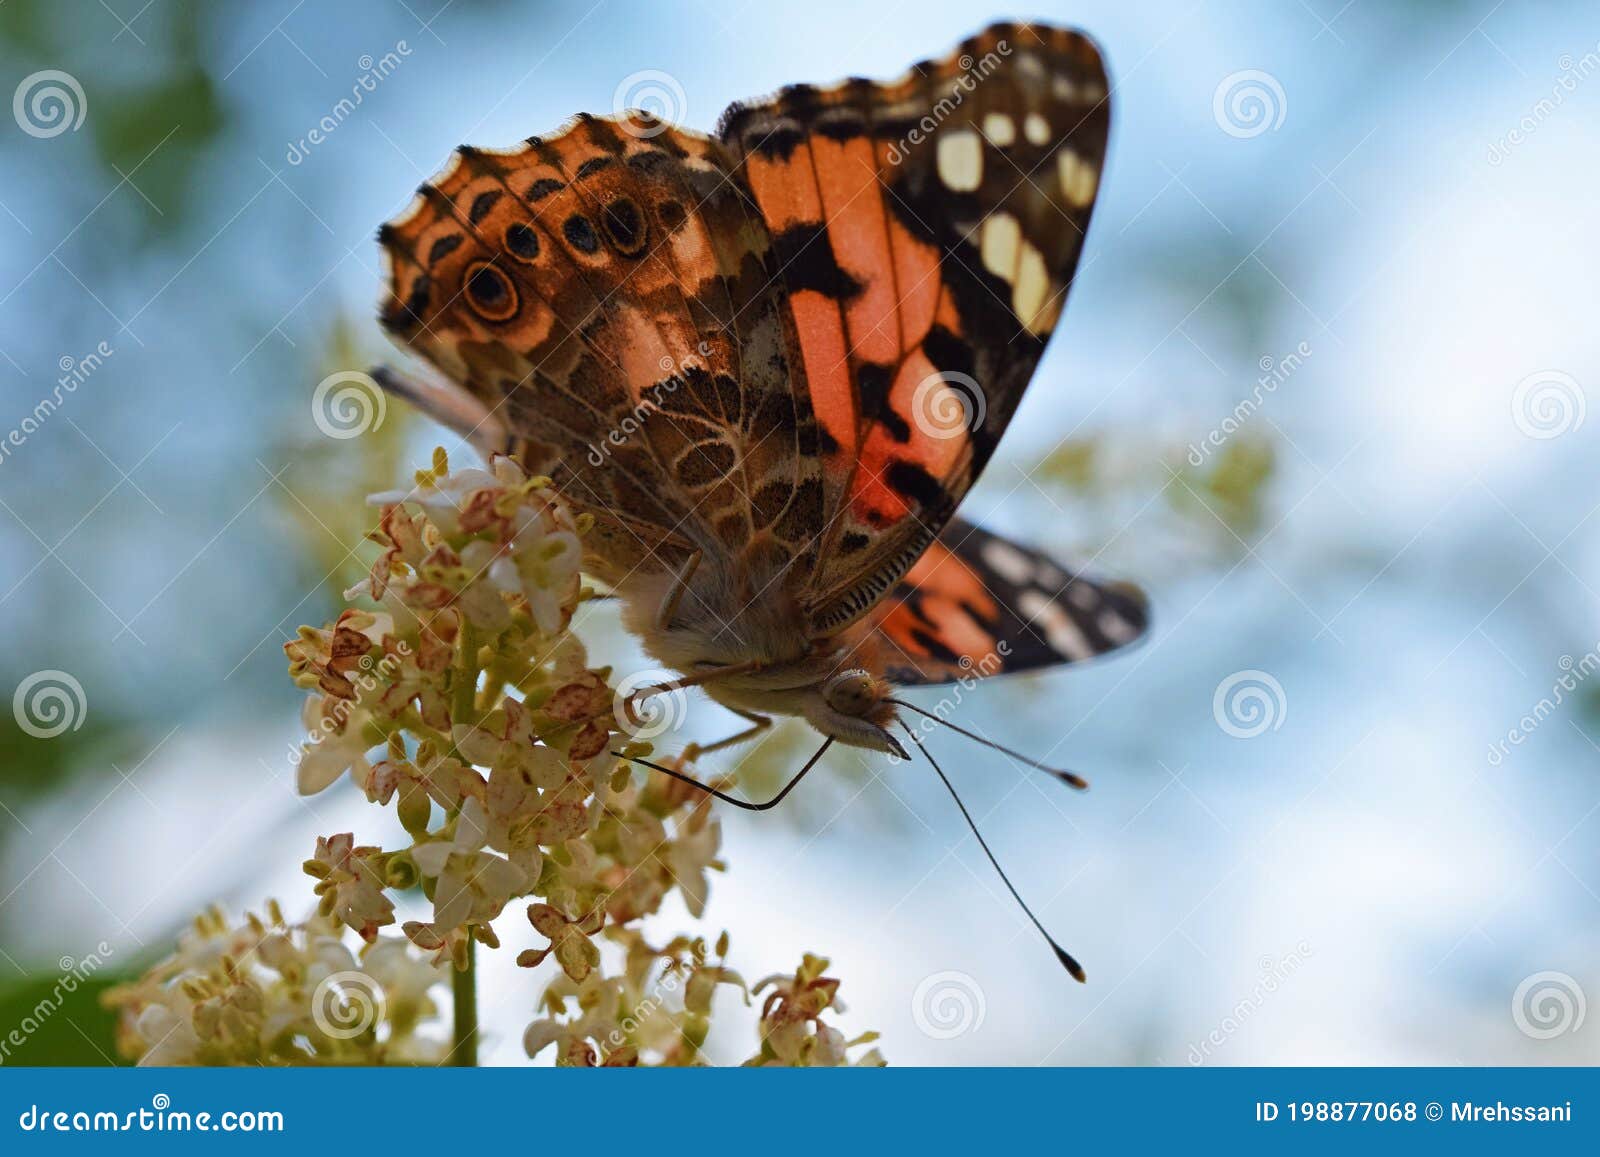 vanessa cardui , the painted lady butterfly nectar suckling on flower , butterflies of iran